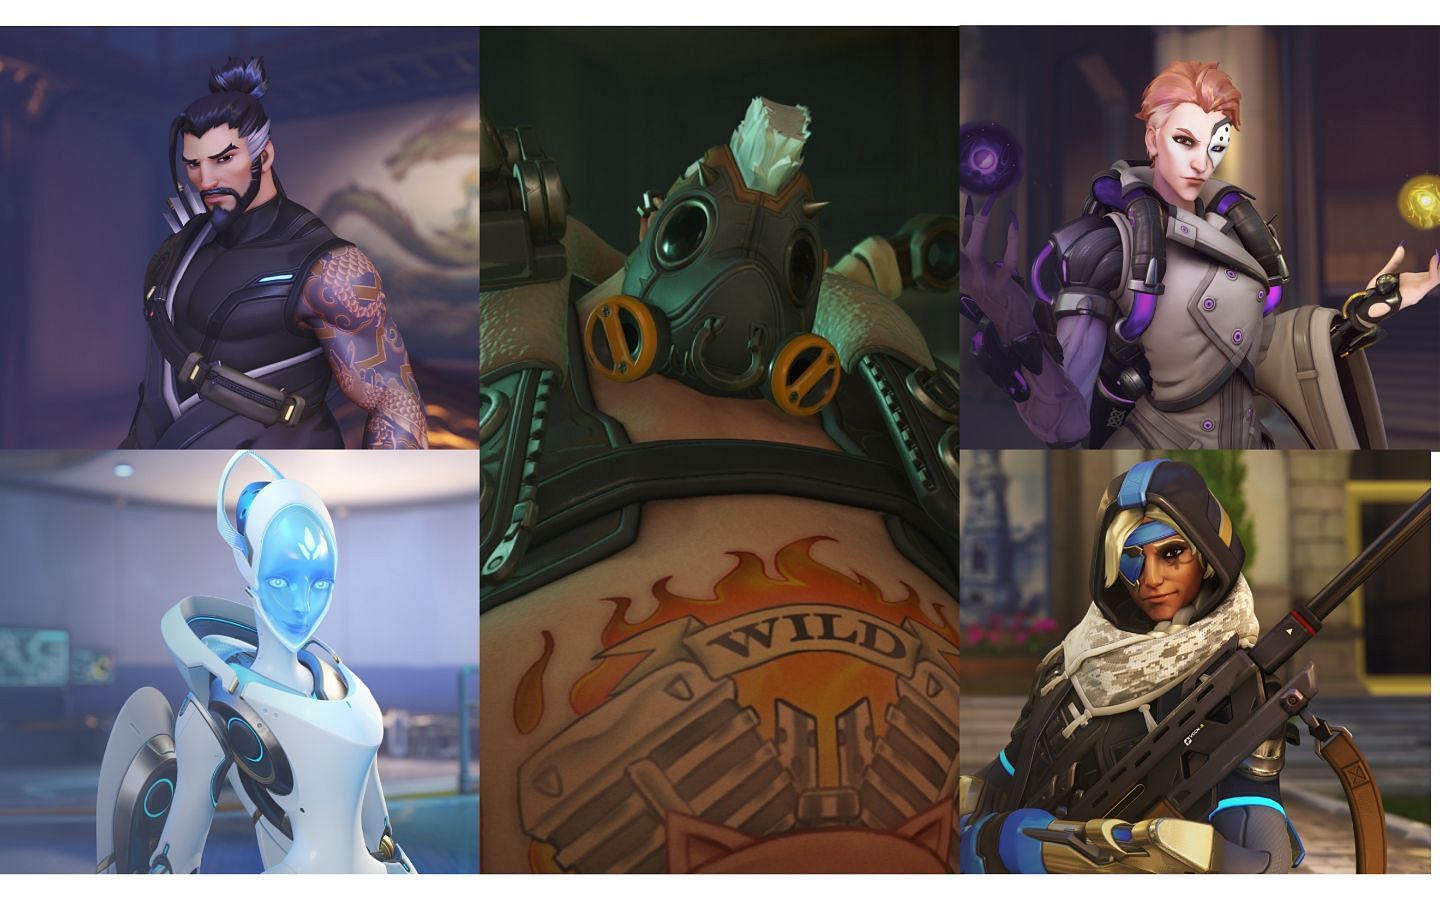 Heroes in Combination two(Images via Blizzard Entertainment)